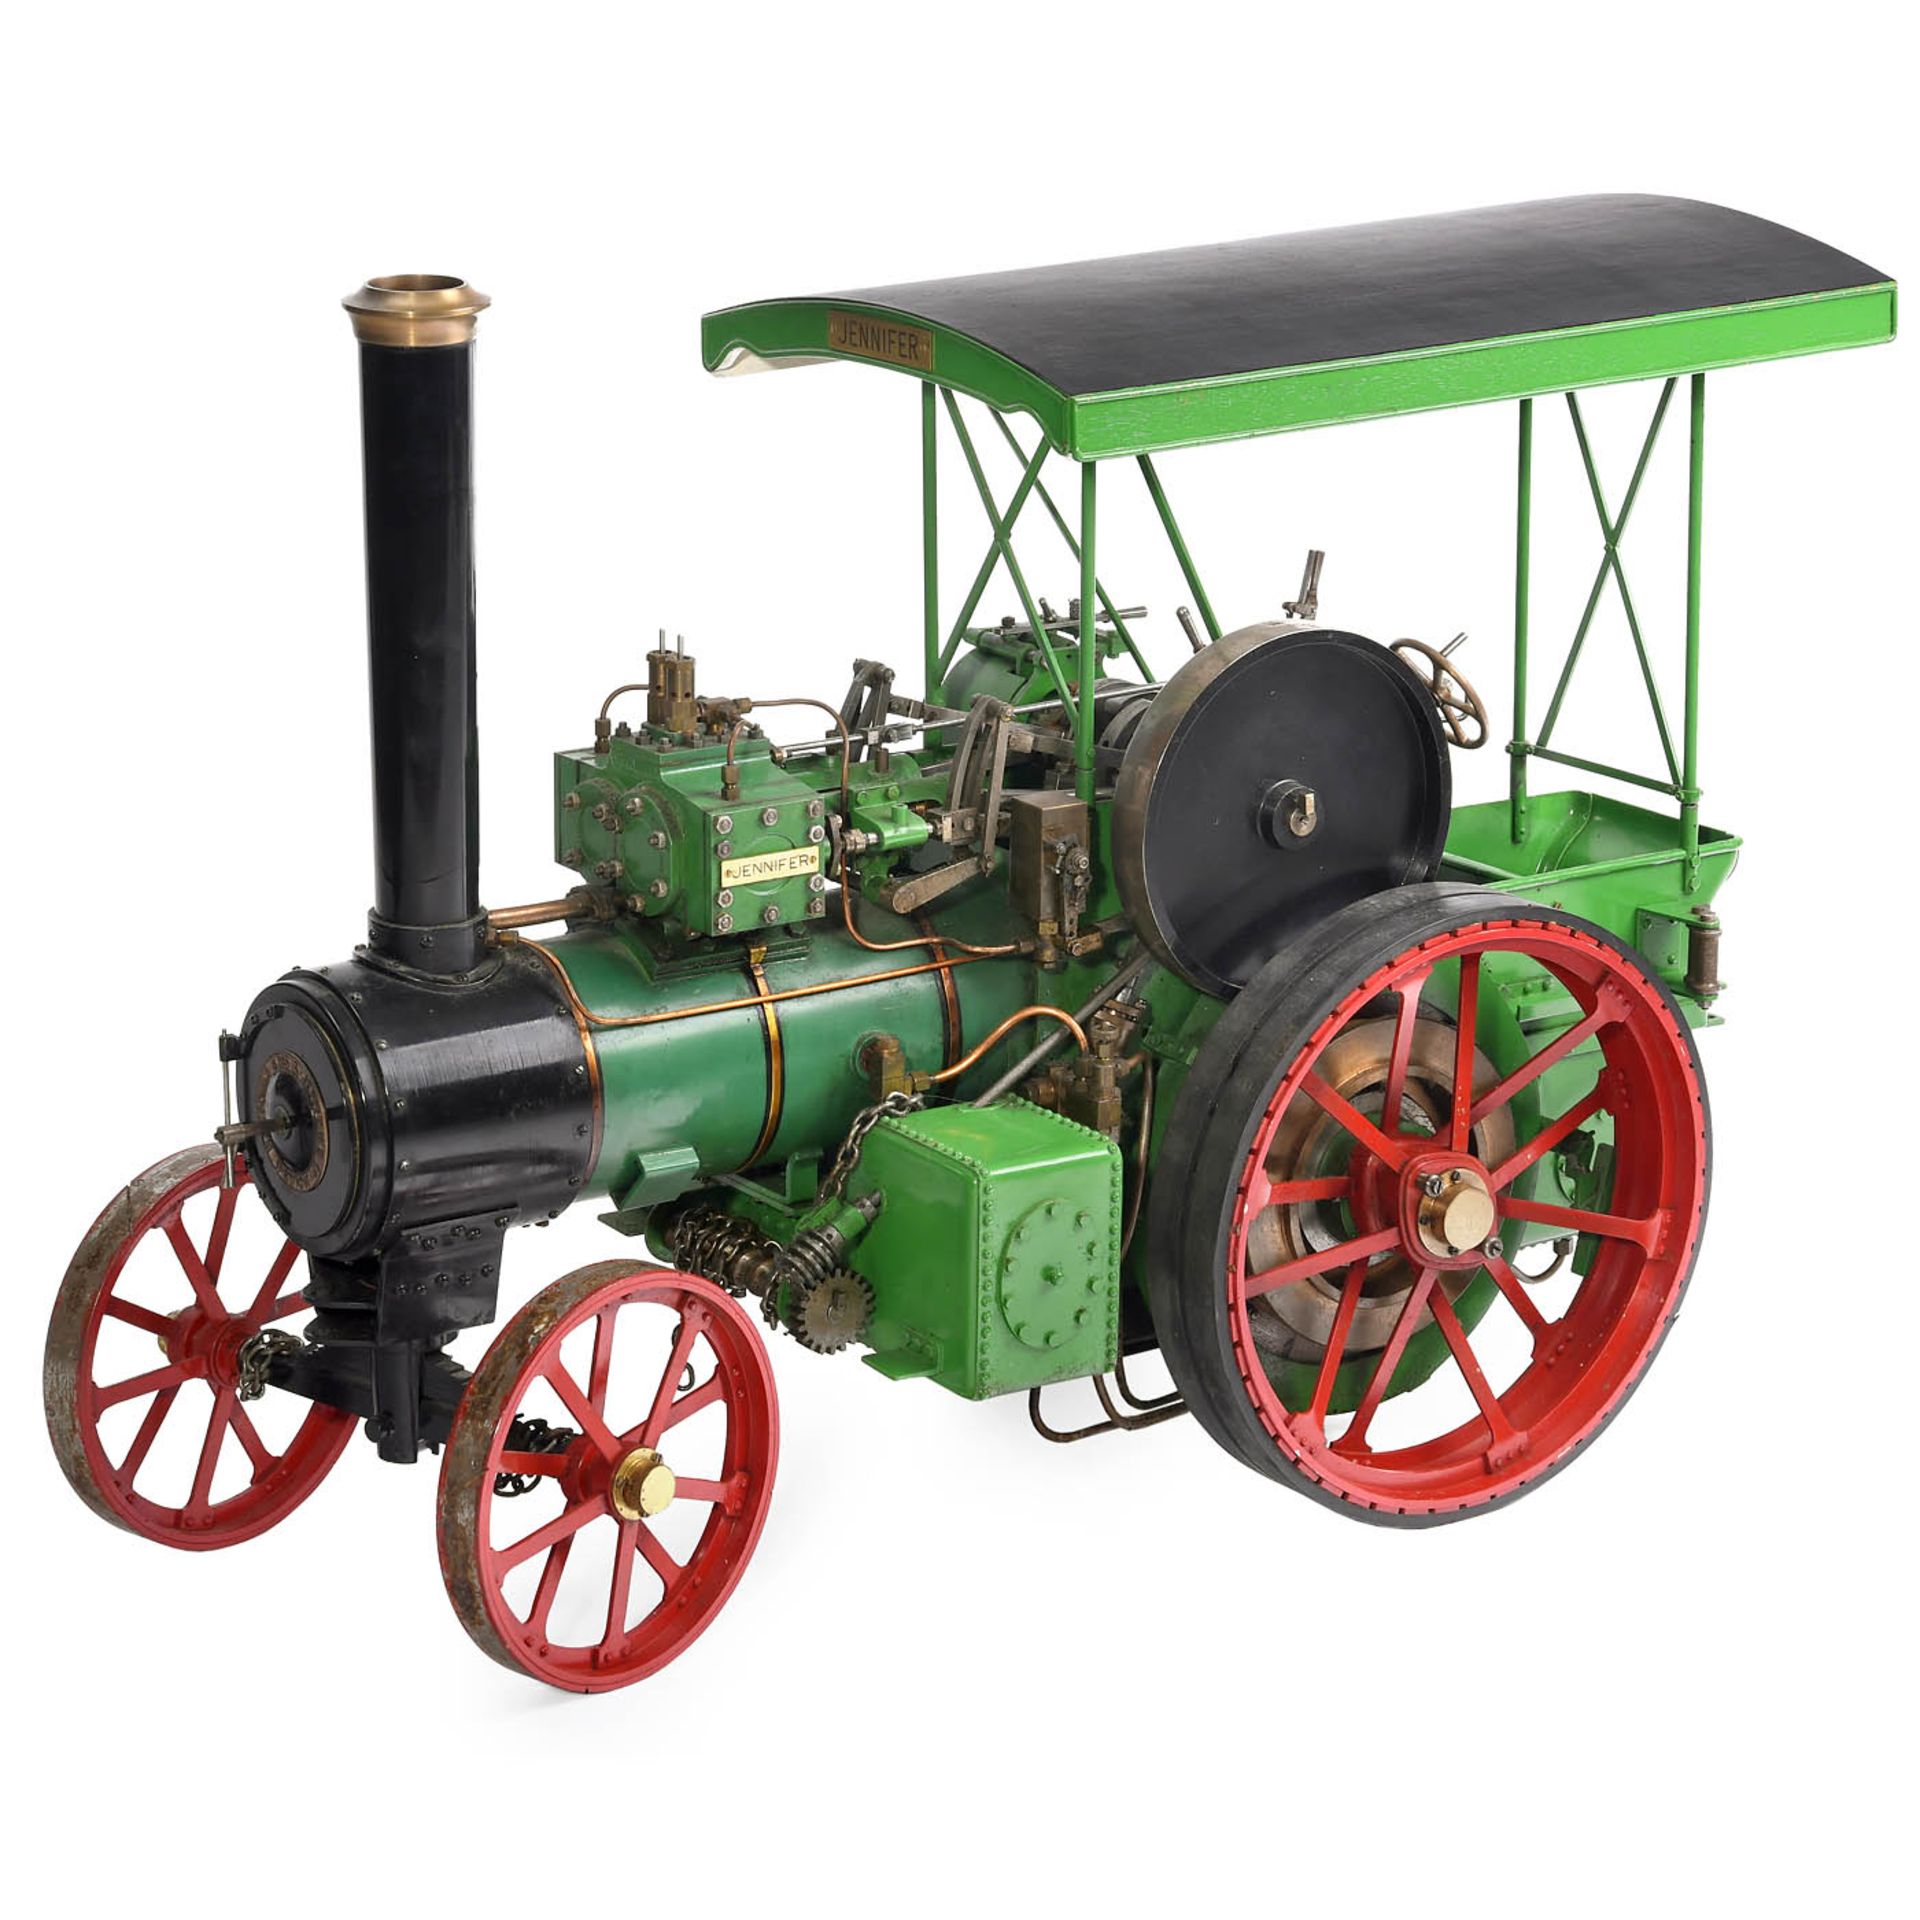 2-inch Scale Model of a Live-Steam Traction Engine "Jenifer", c. 1984